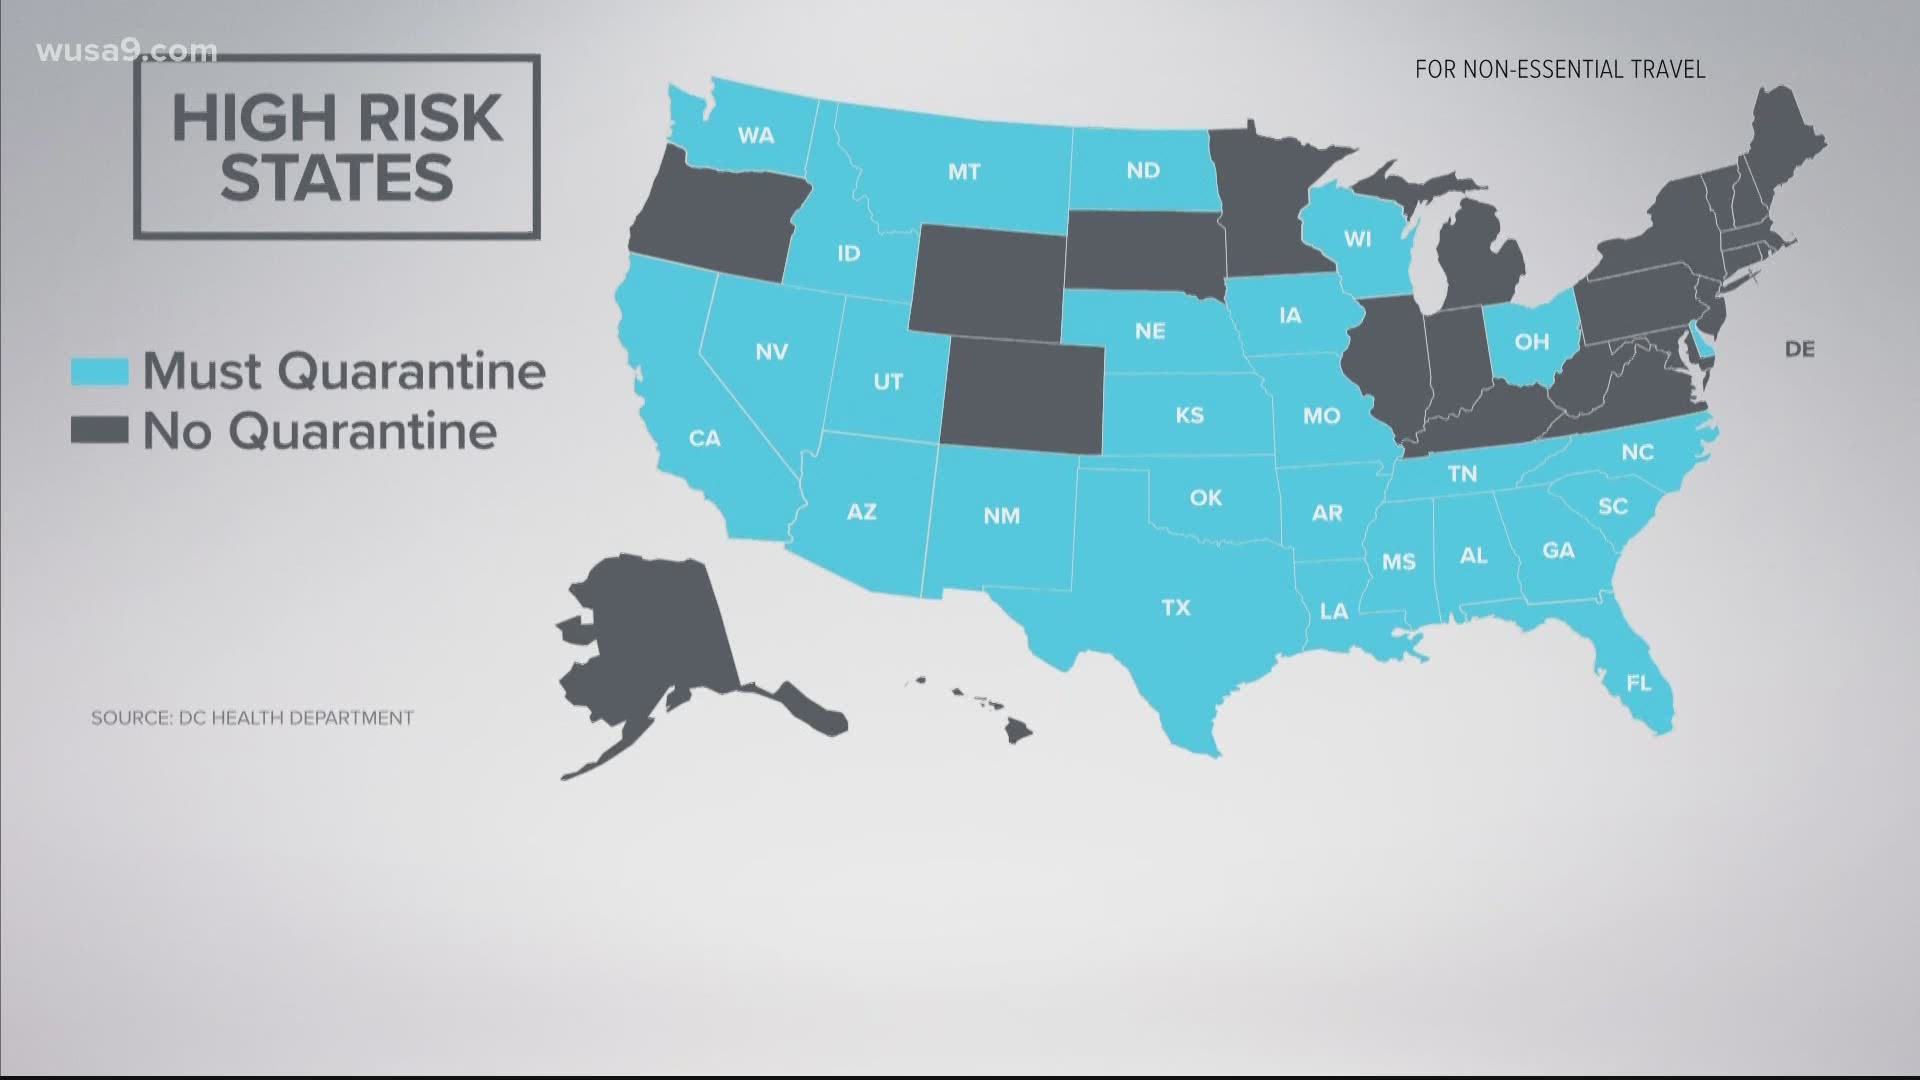 DC Health released a list of 'high-risk states,' and anyone traveling into D.C. for non-essential activities from those states must self-quarantine for 14-days.